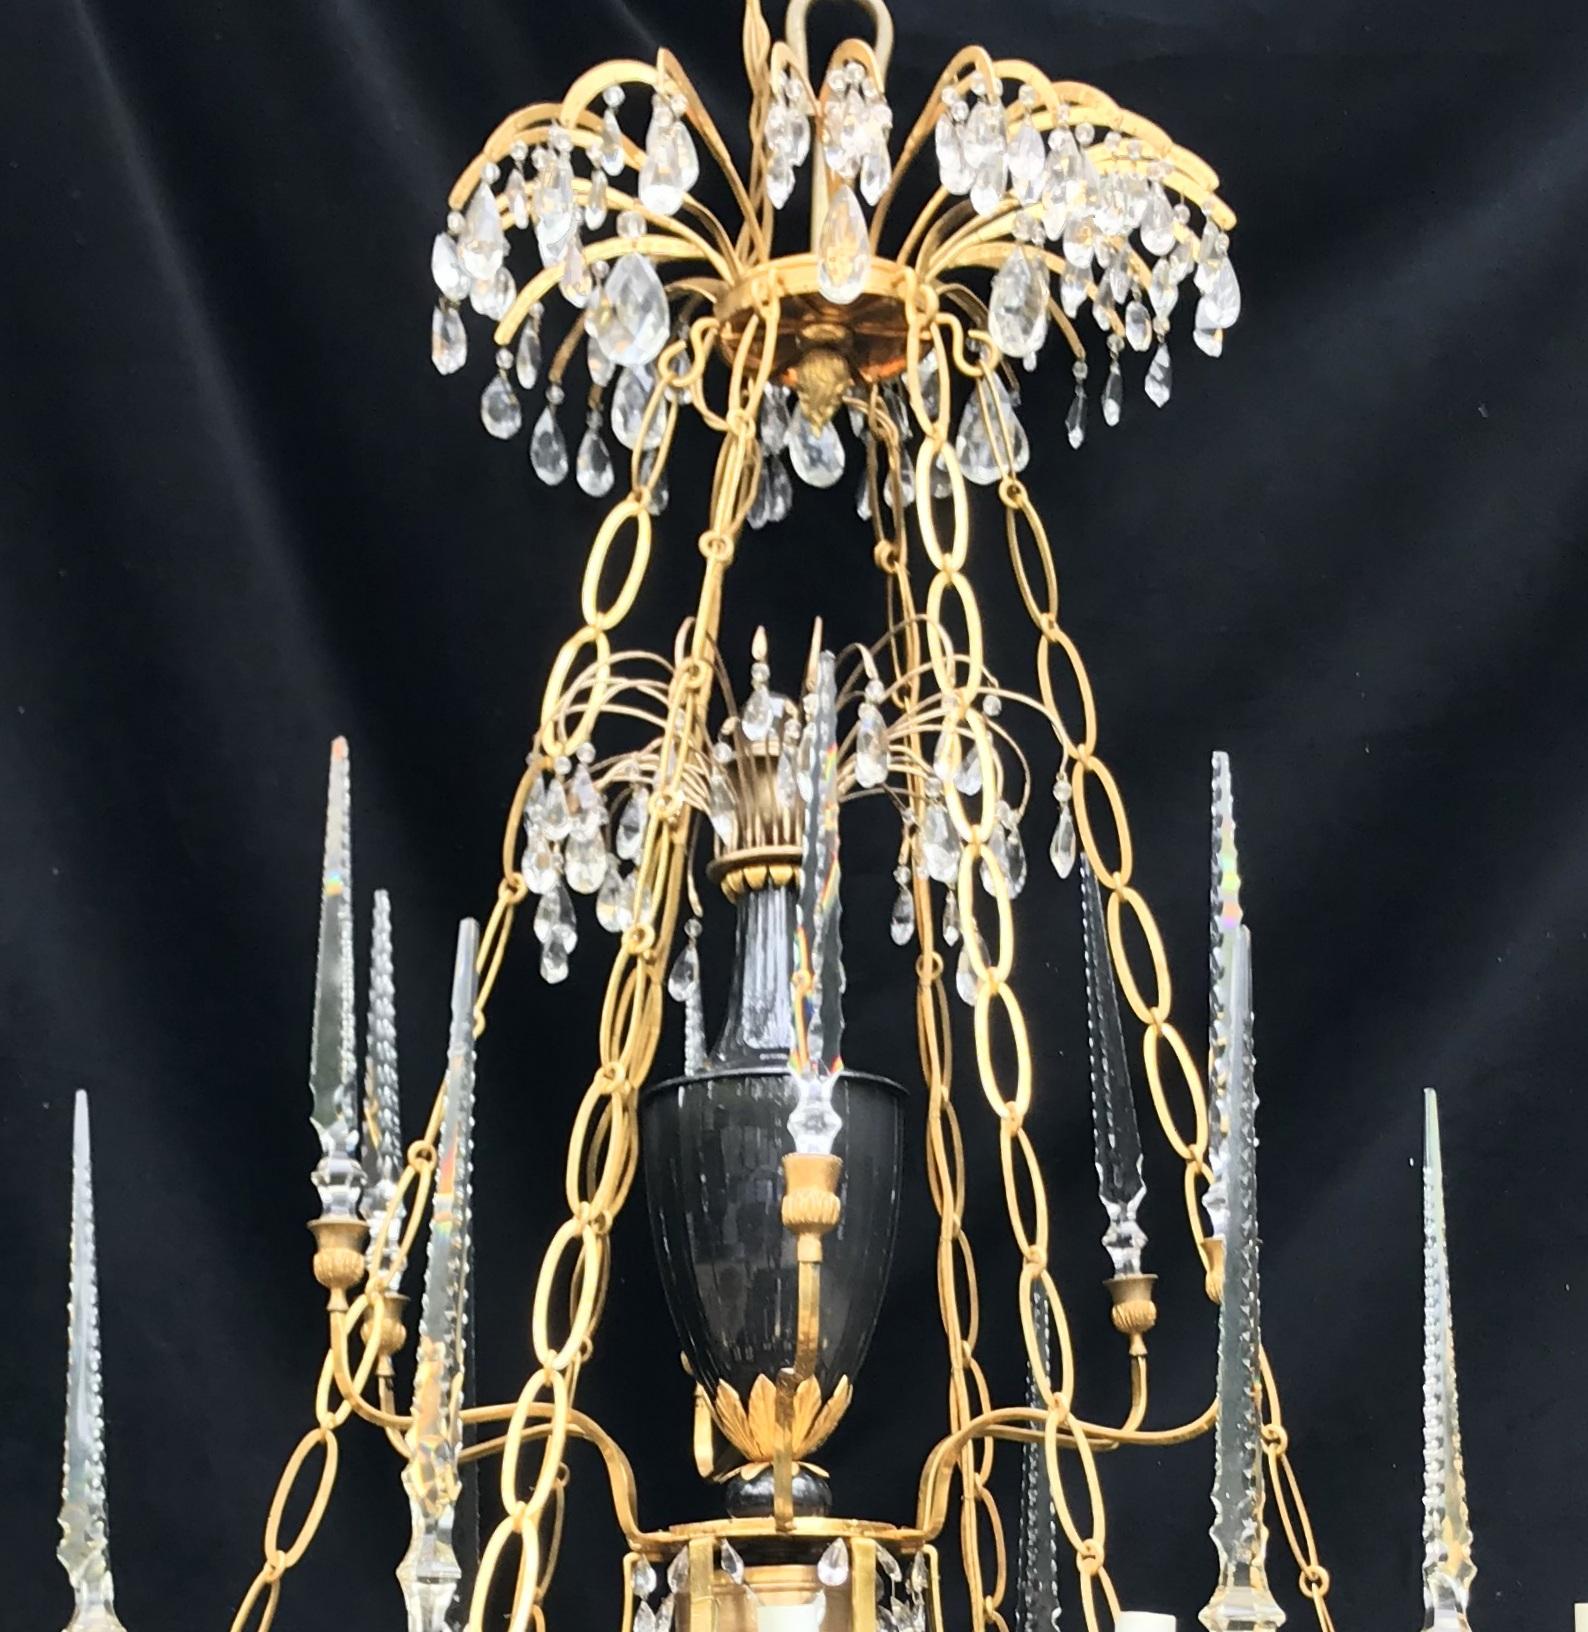 A wonderful palatial Baltic 19th century Russian neoclassical bronze and crystal twenty five-light chandelier with porcelain urn centerpiece and surrounded by cut crystal spikes finished with a crystal basket on the bottom and bronze pineapple